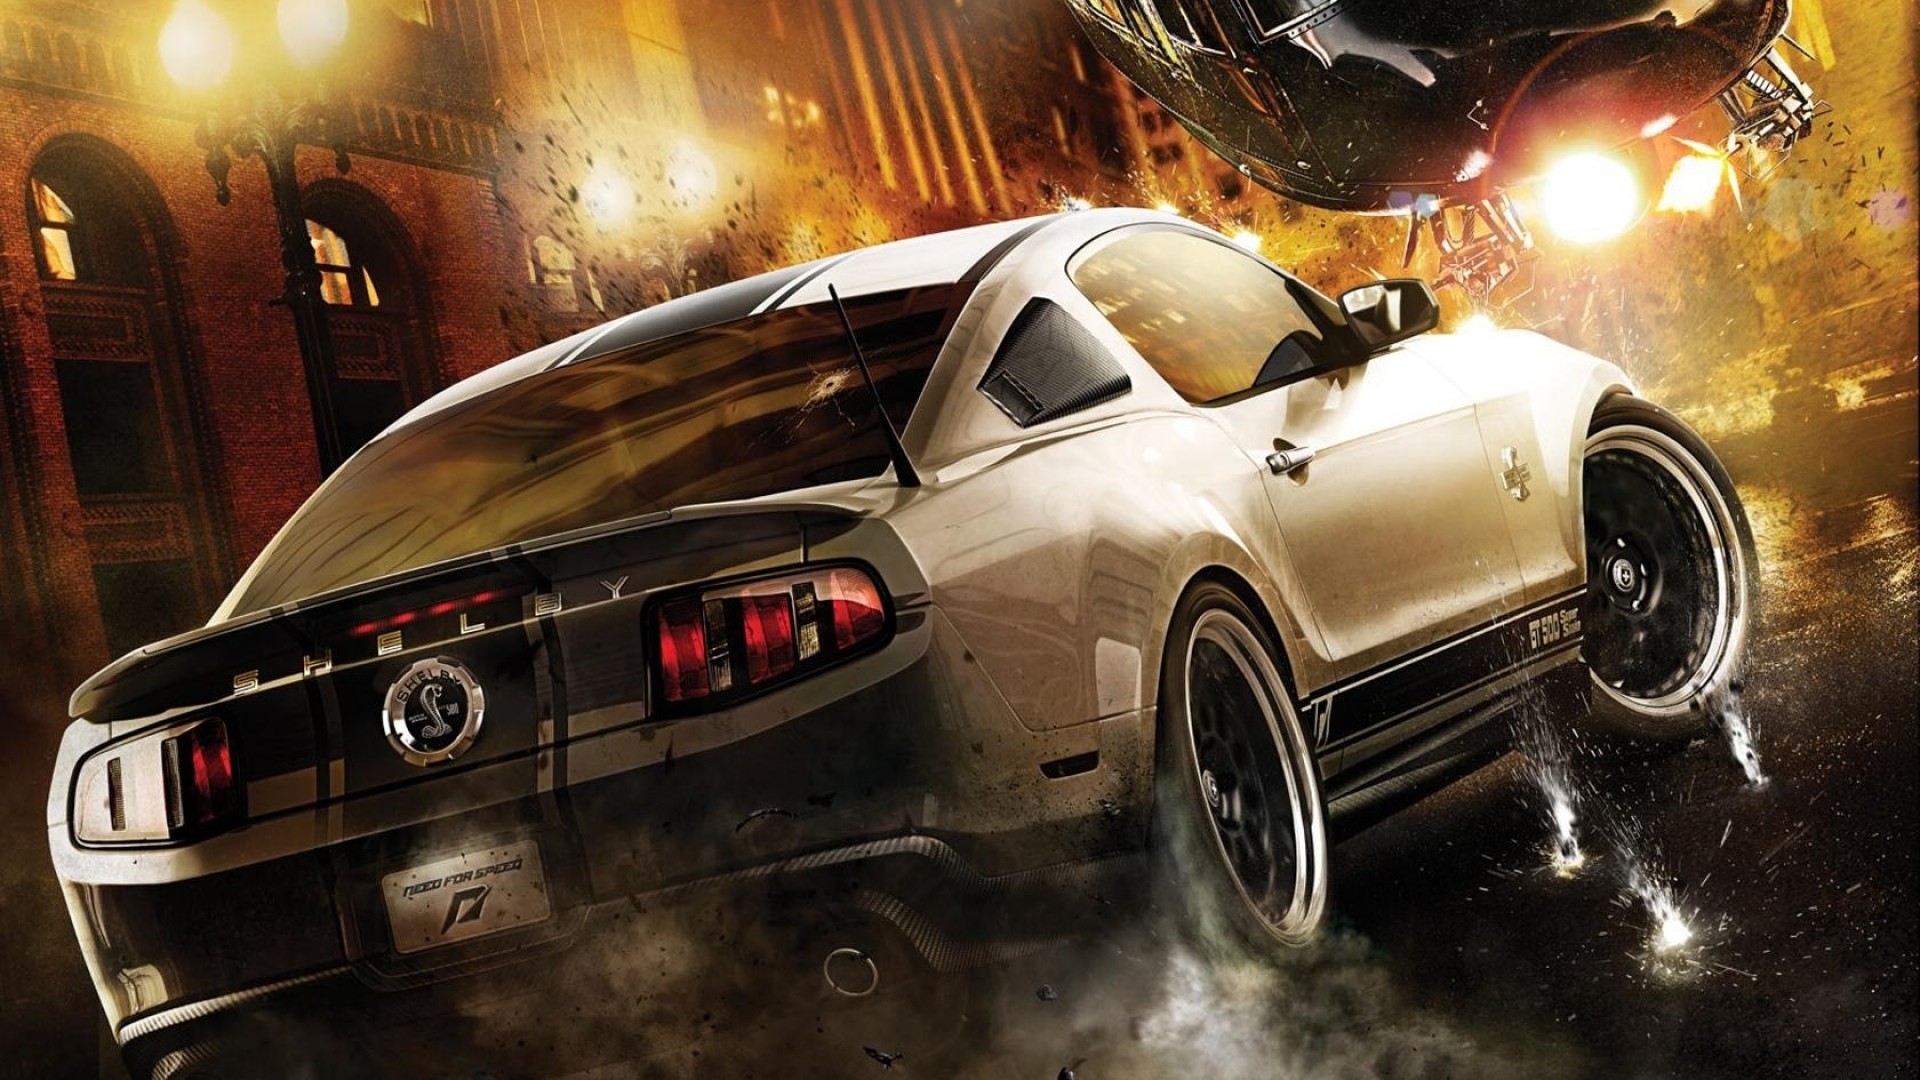 1920x1080  Wallpaper nfs, need for speed, shelby, helicopter, city